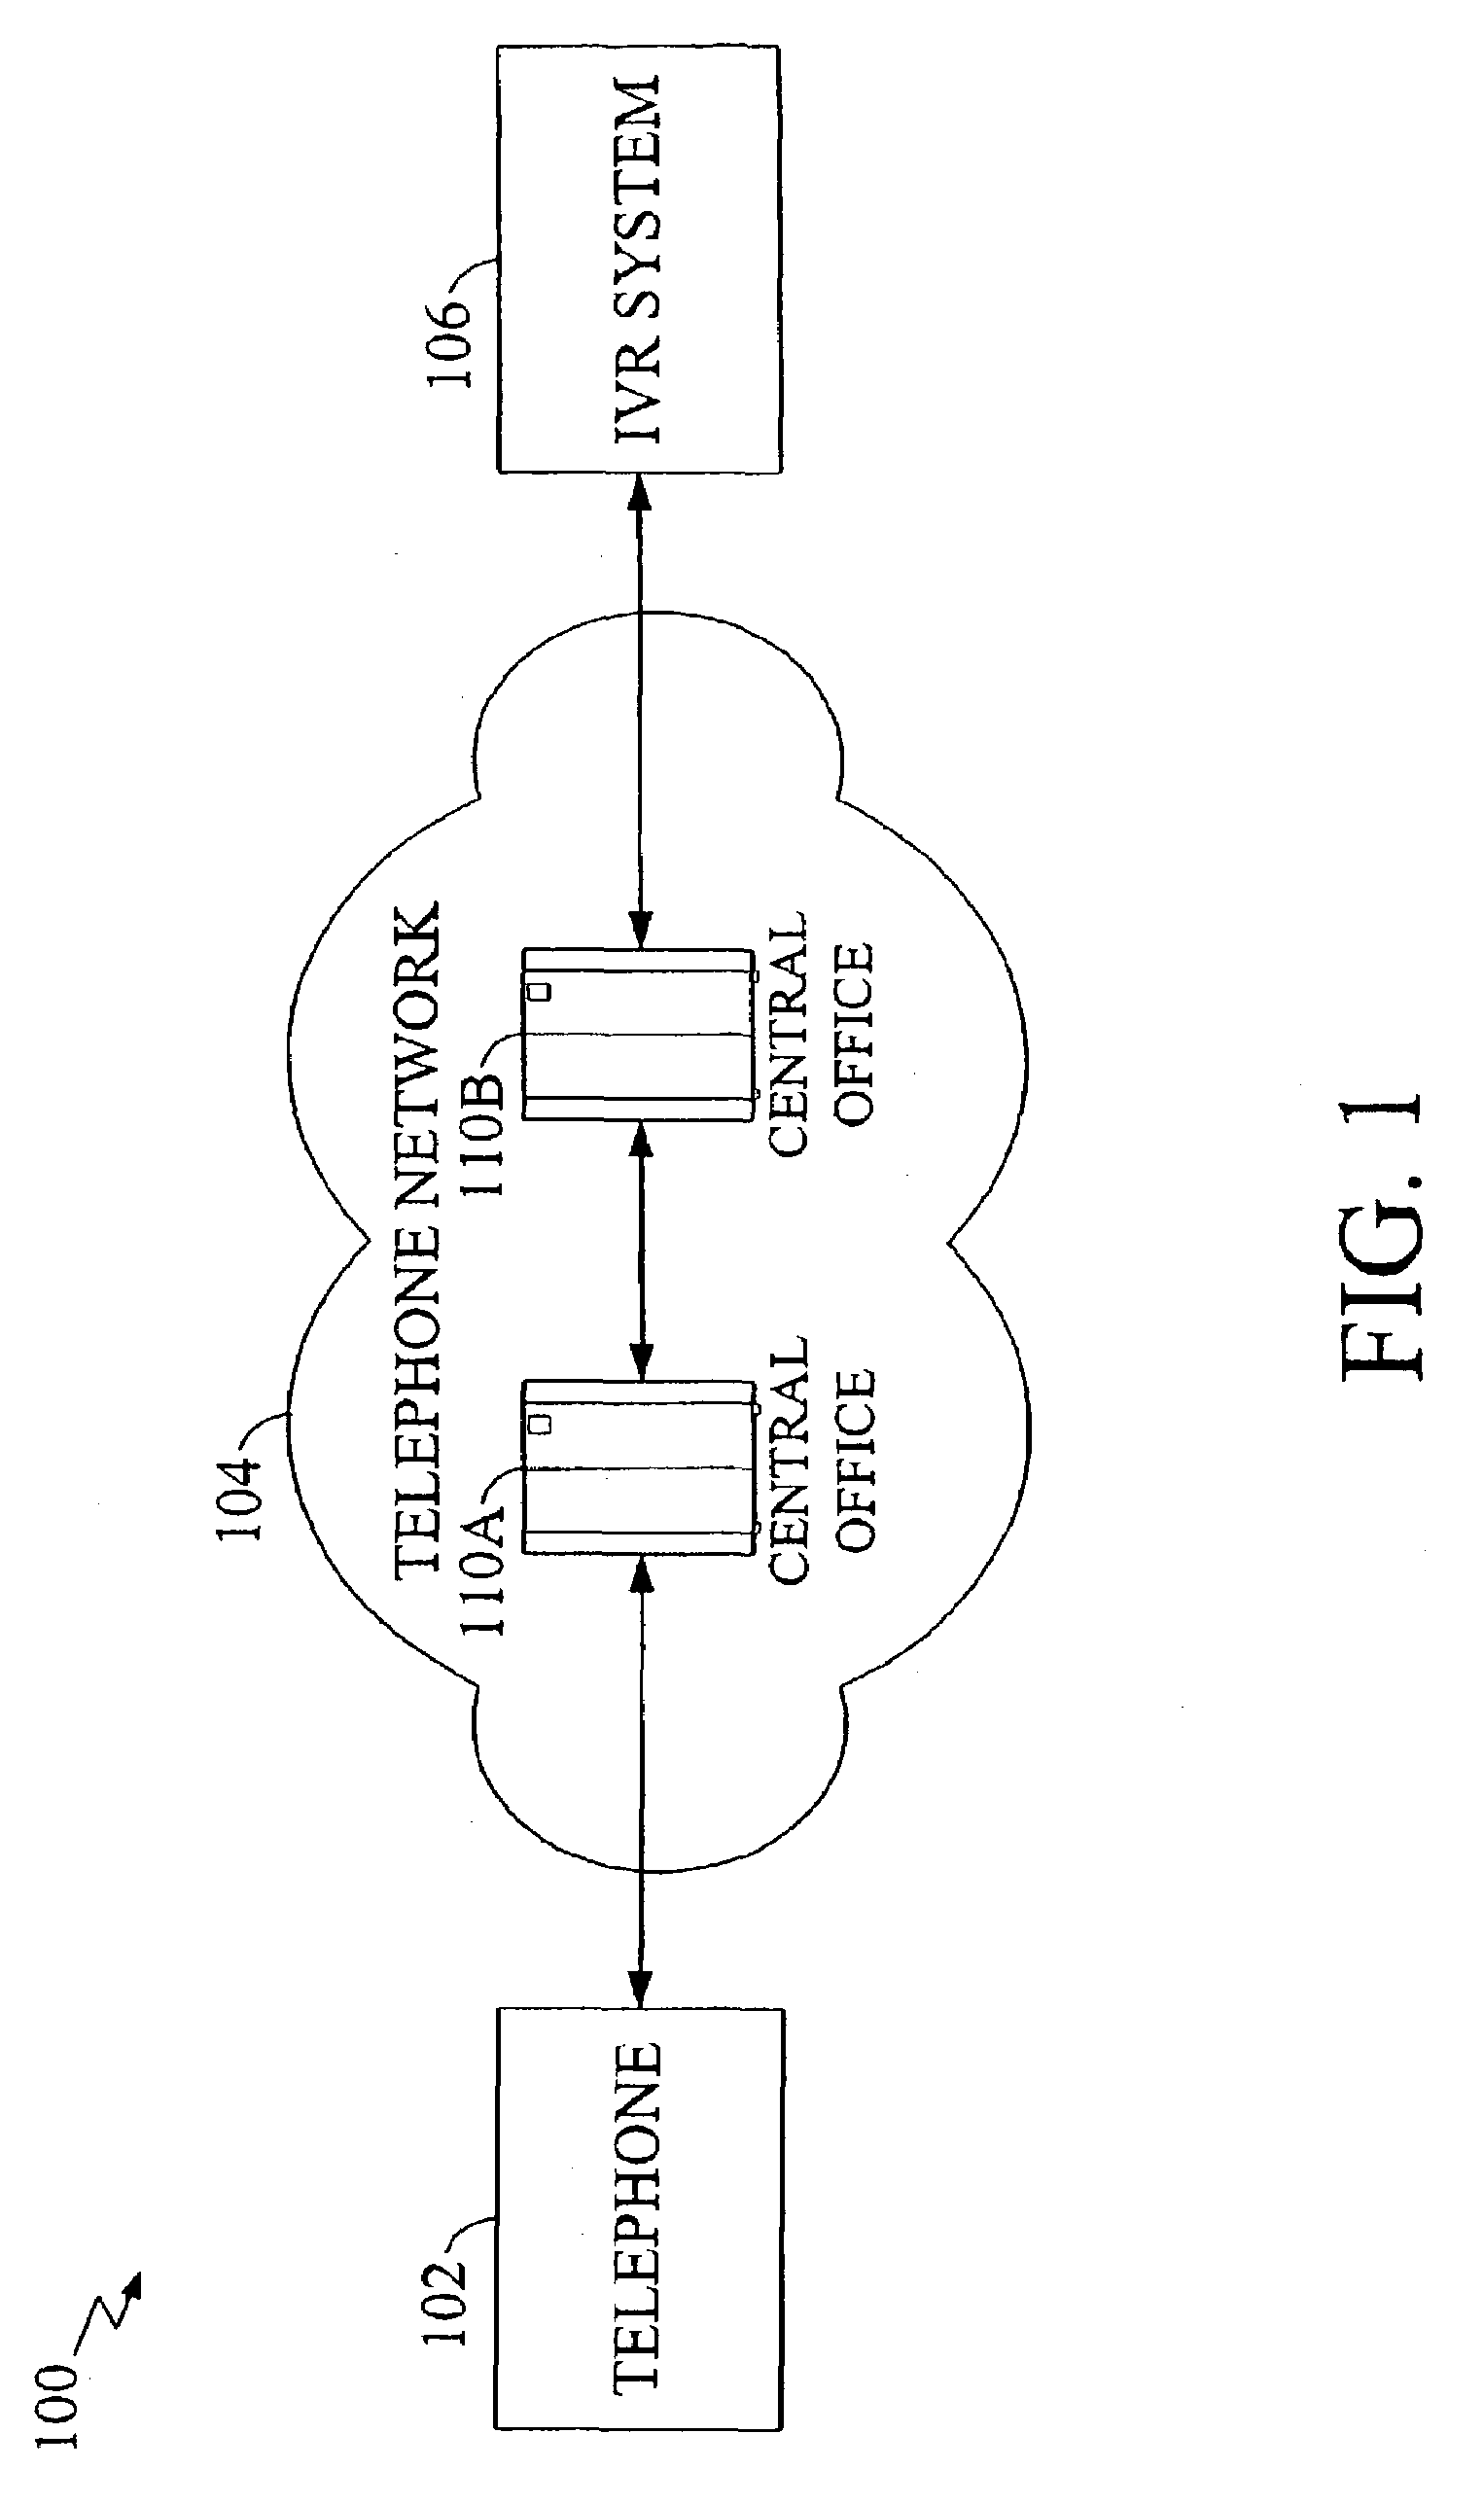 System and method for providing universal access to voice response systems